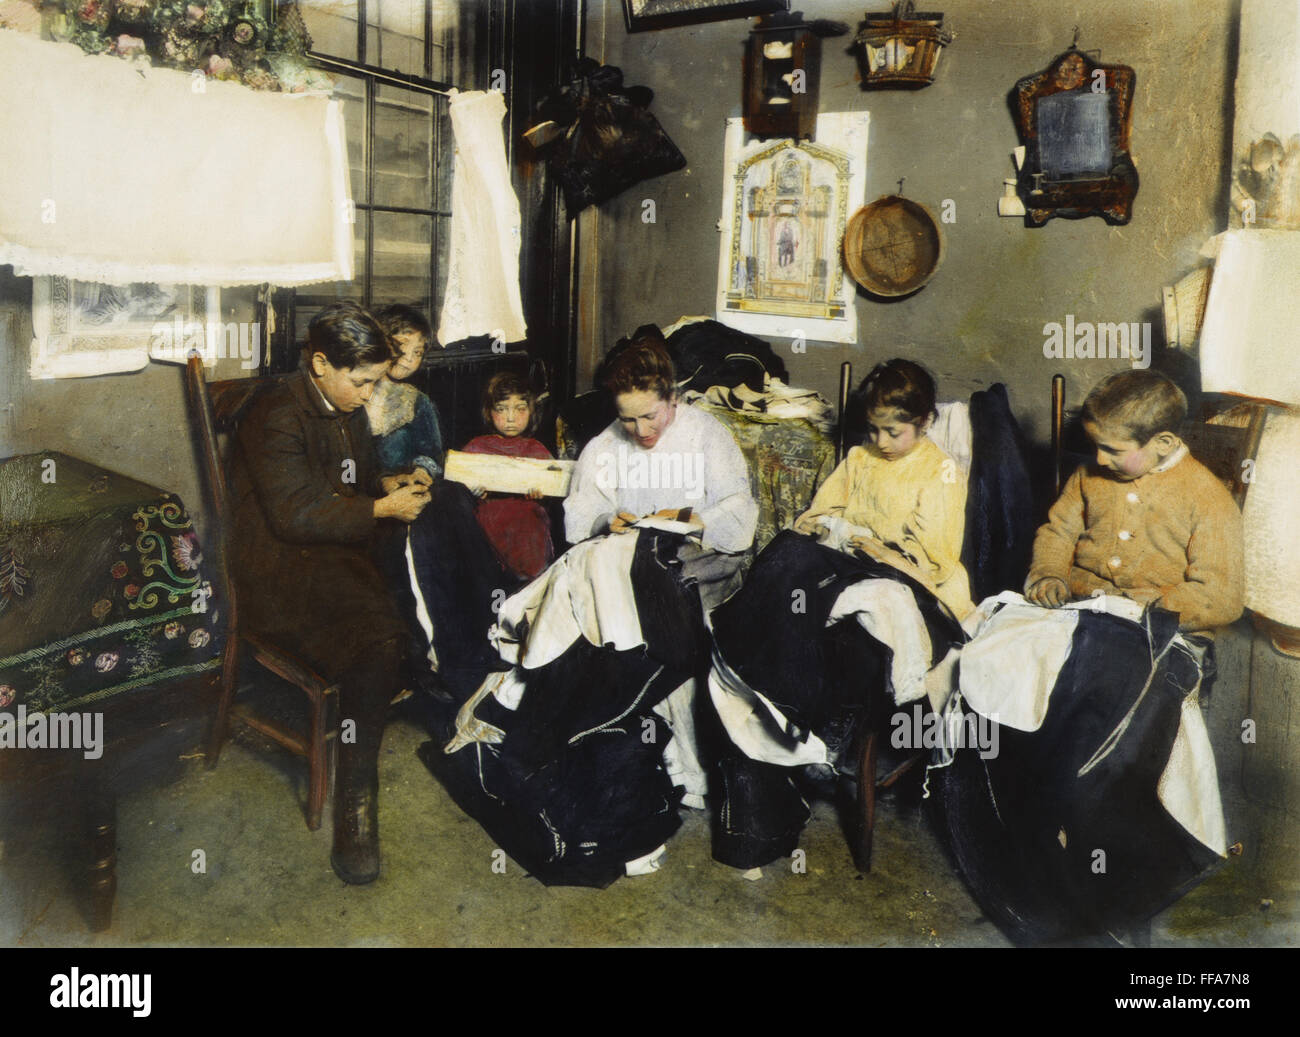 IMMIGRANTS: PIECEWORK. /nAn Italian immigrant family doing garment piecework in their New York City tenement home. Oil over a photograph, c1905. Stock Photo